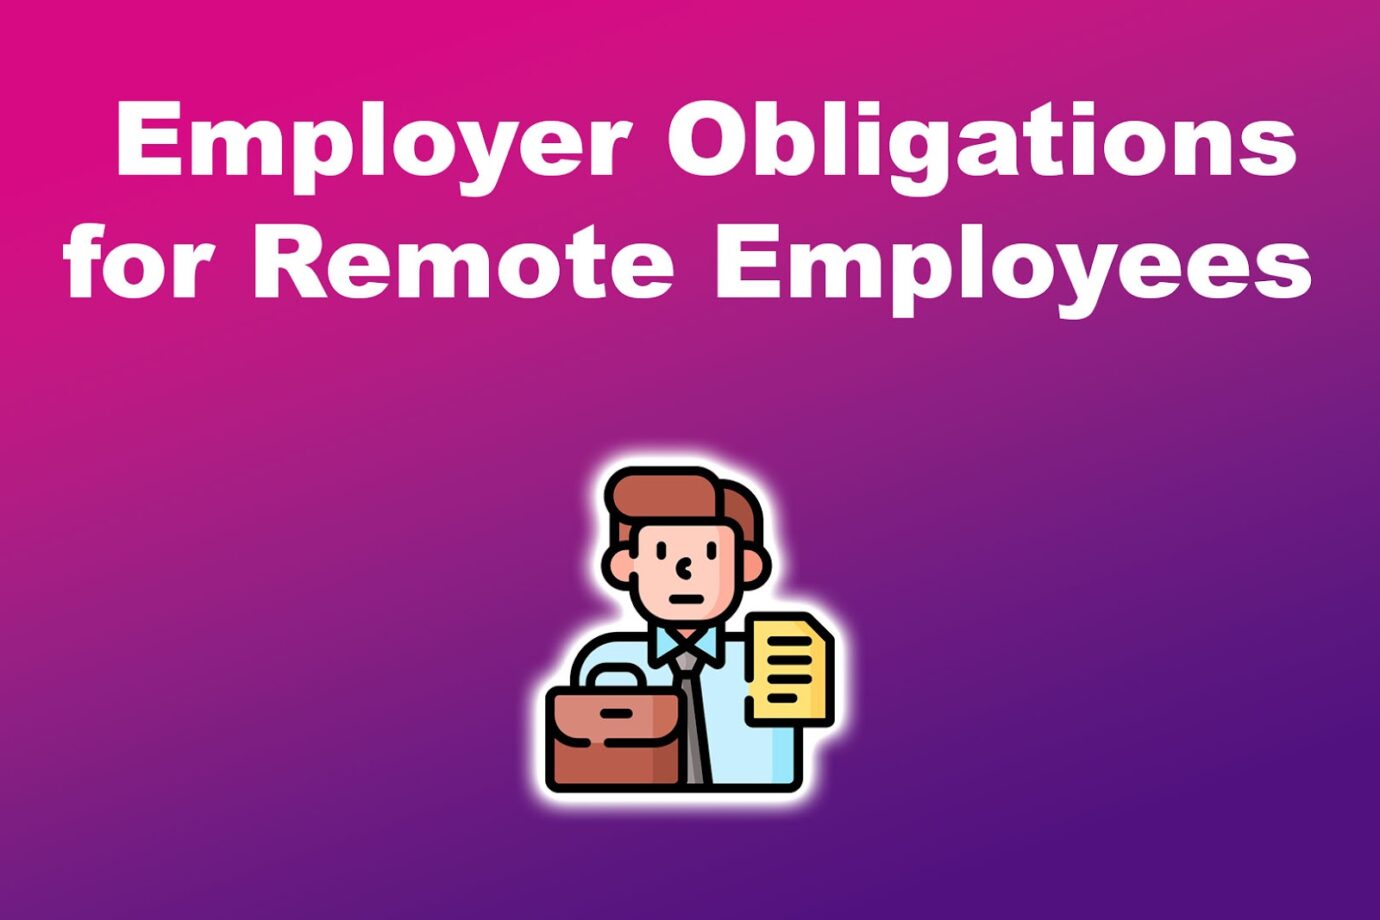 Employer Obligations for Remote Employees